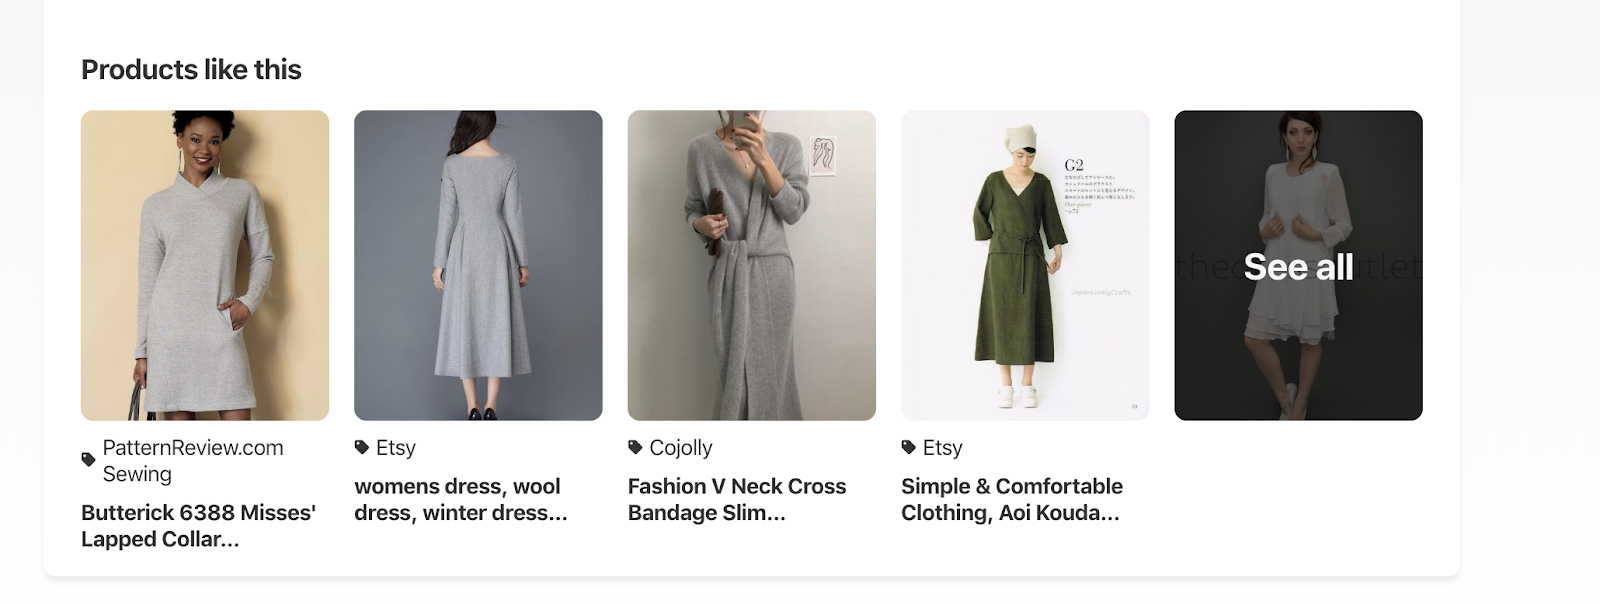 pinterest product pins shoppable feed